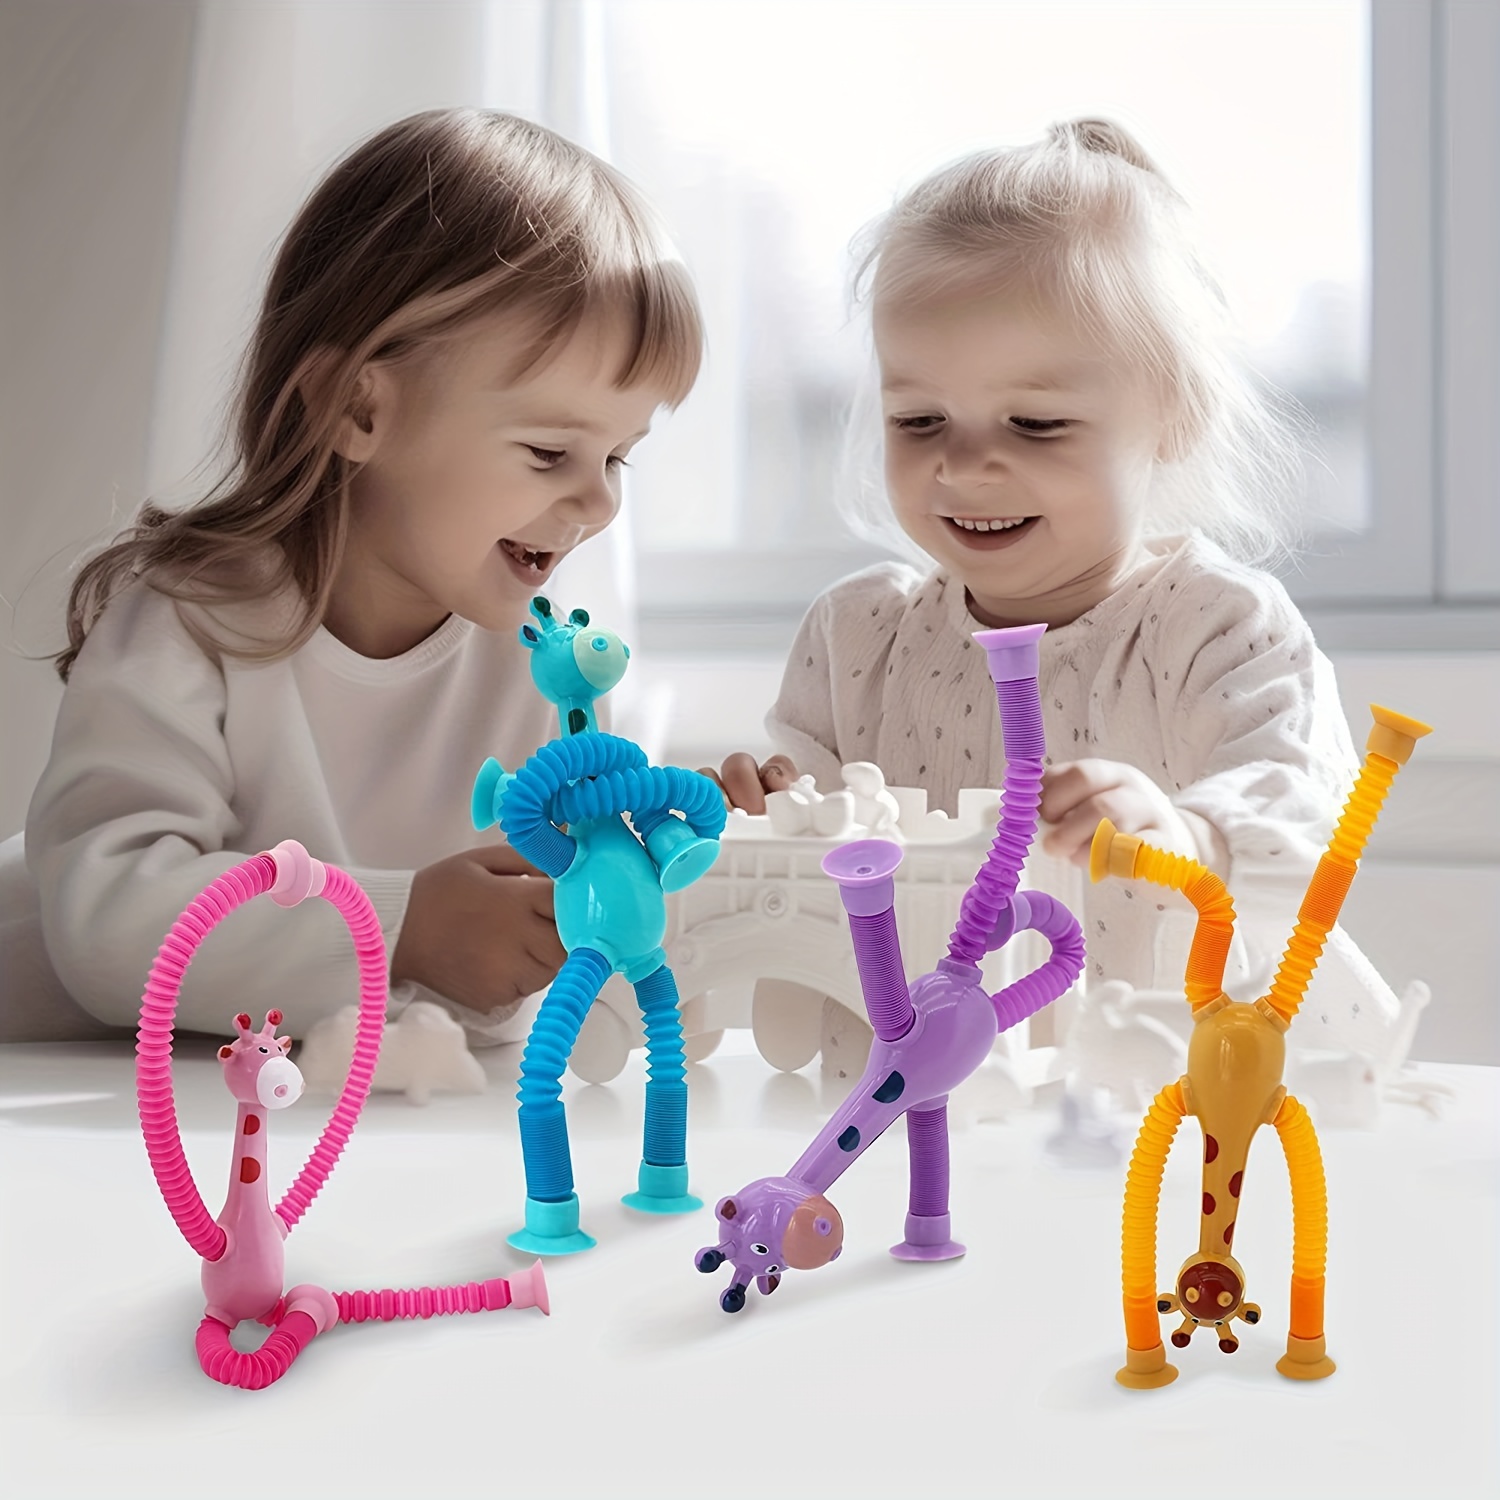 

4 Packs Suction Cup Robot & Giraffe Toys For Kids, Pop Tubes Robots, Road Trip Toys, Mini Robot, Telescopic Suction Cup Animal Toys, Fidget Toys, Educational Sensory Toy, Random Color Easter Gift